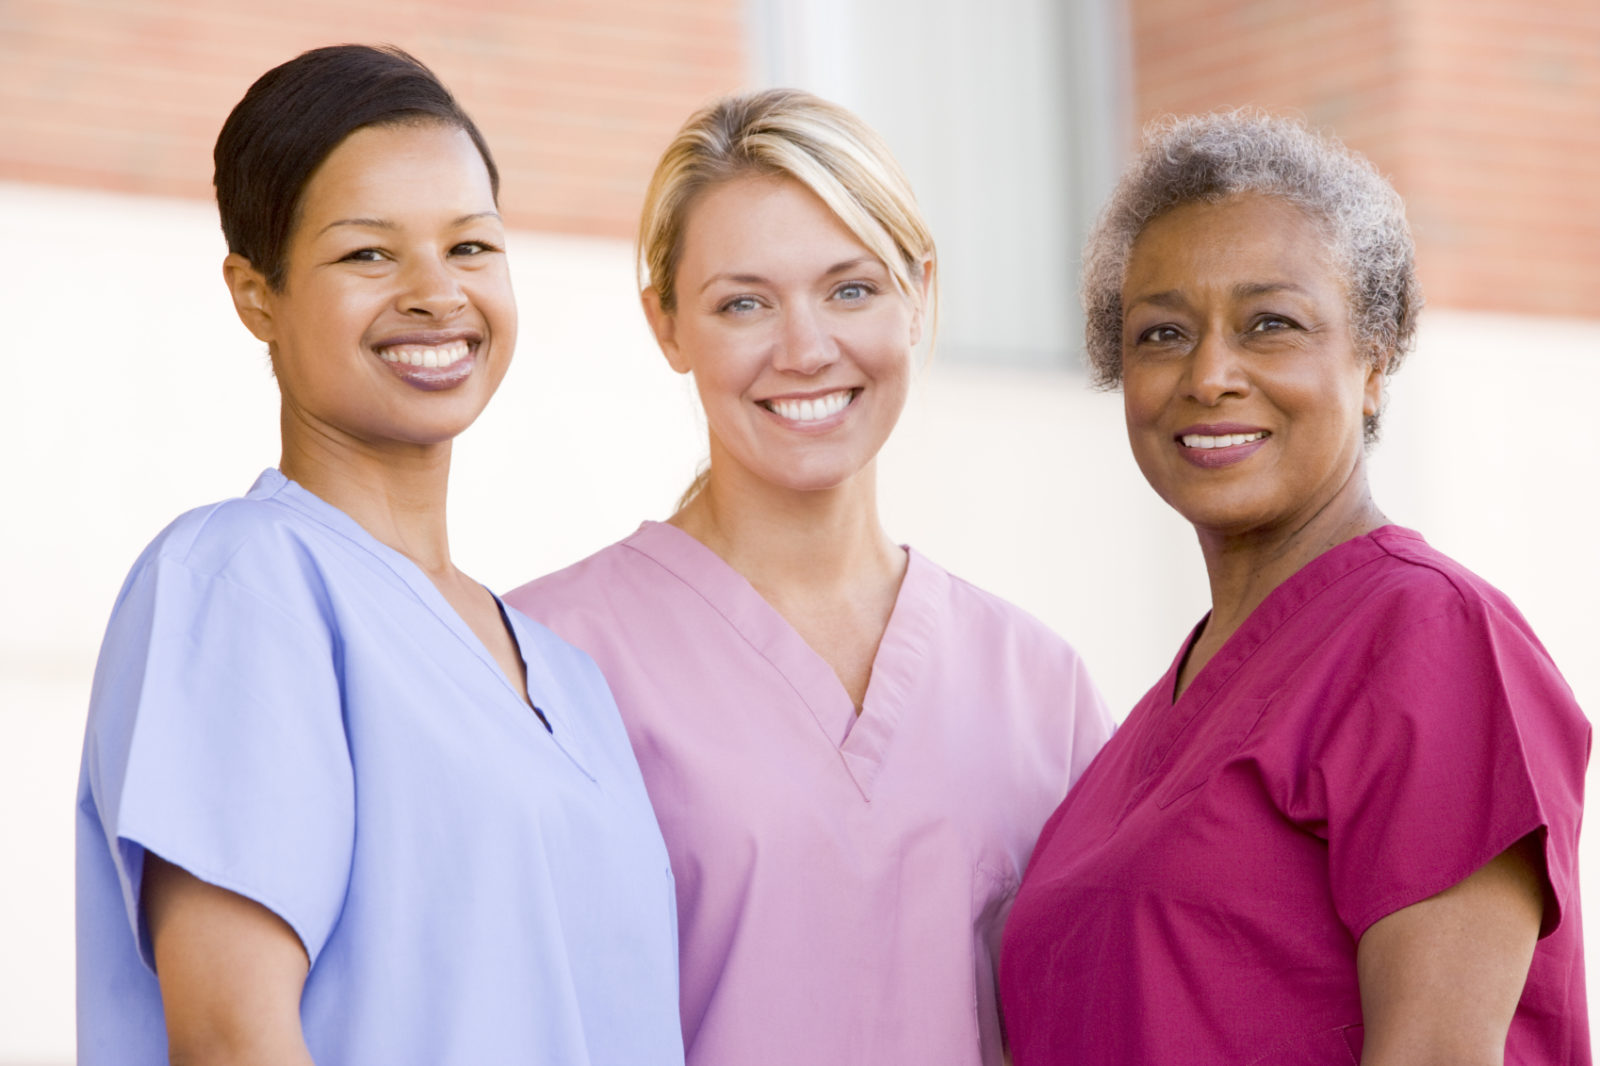 three women dressed in medical scrubs smiling for photo